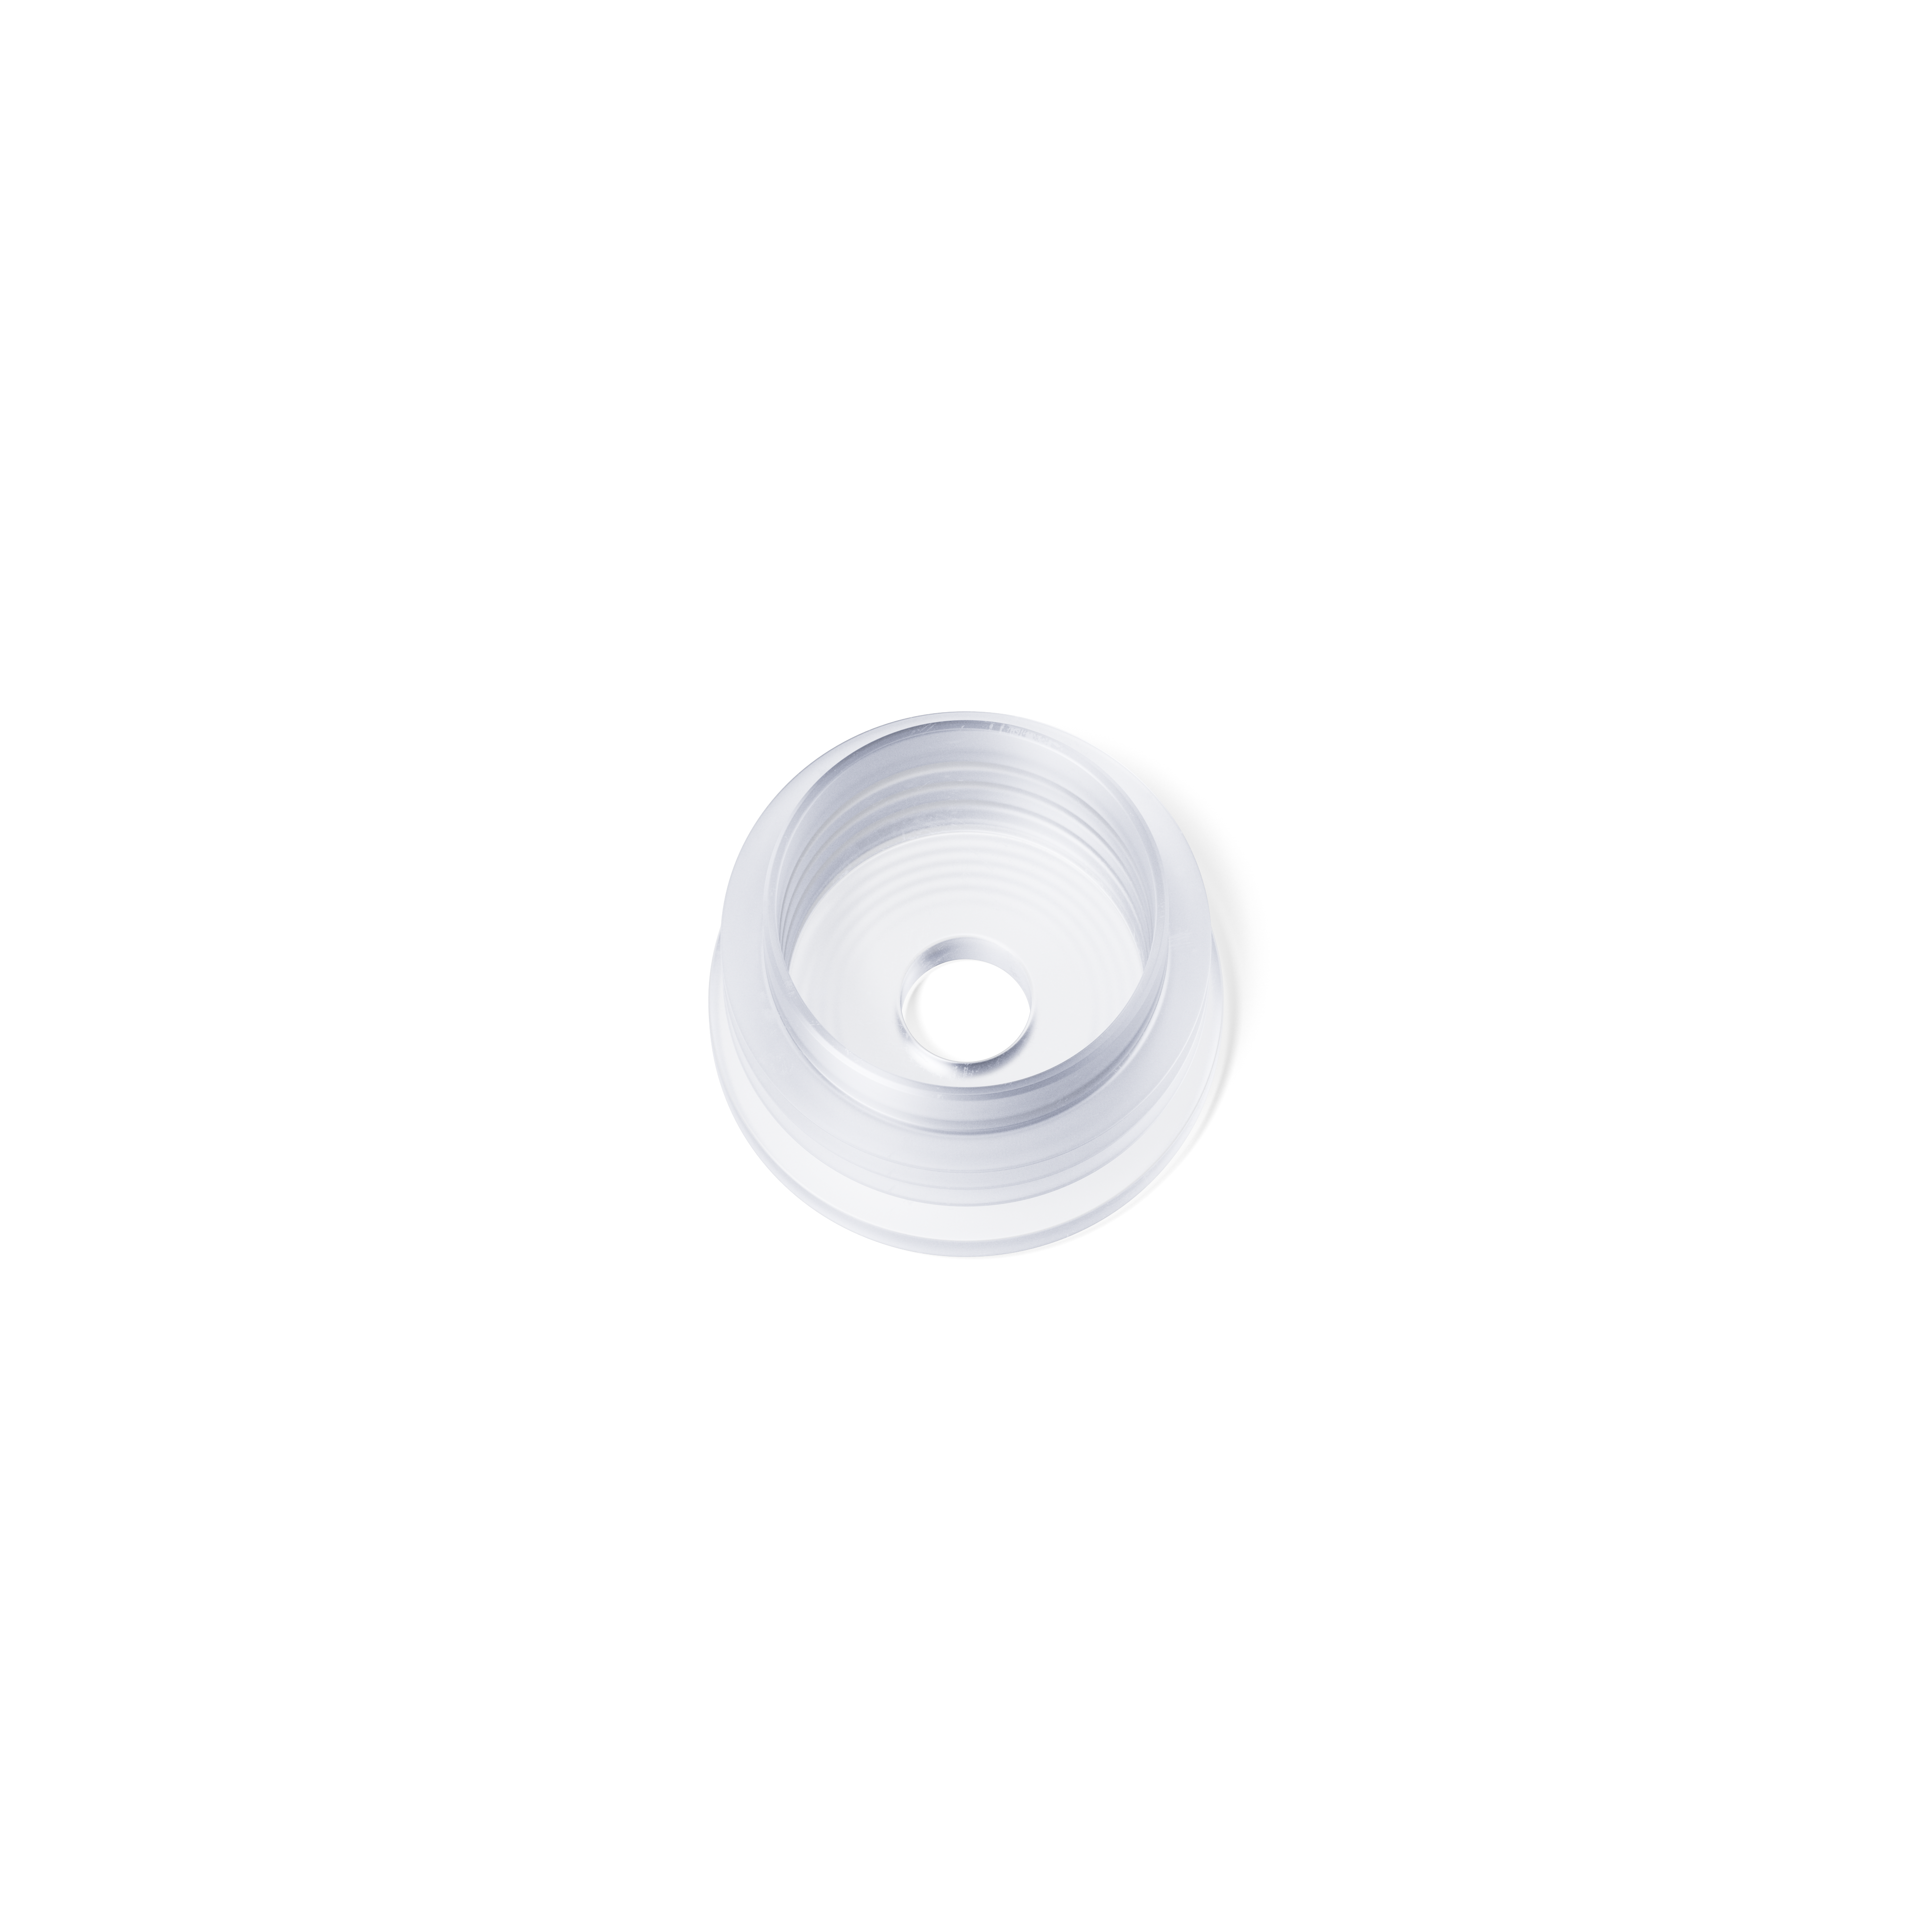 Dropper insert 24/410, natural, 5.0mm opening (Draco 120 and 200)